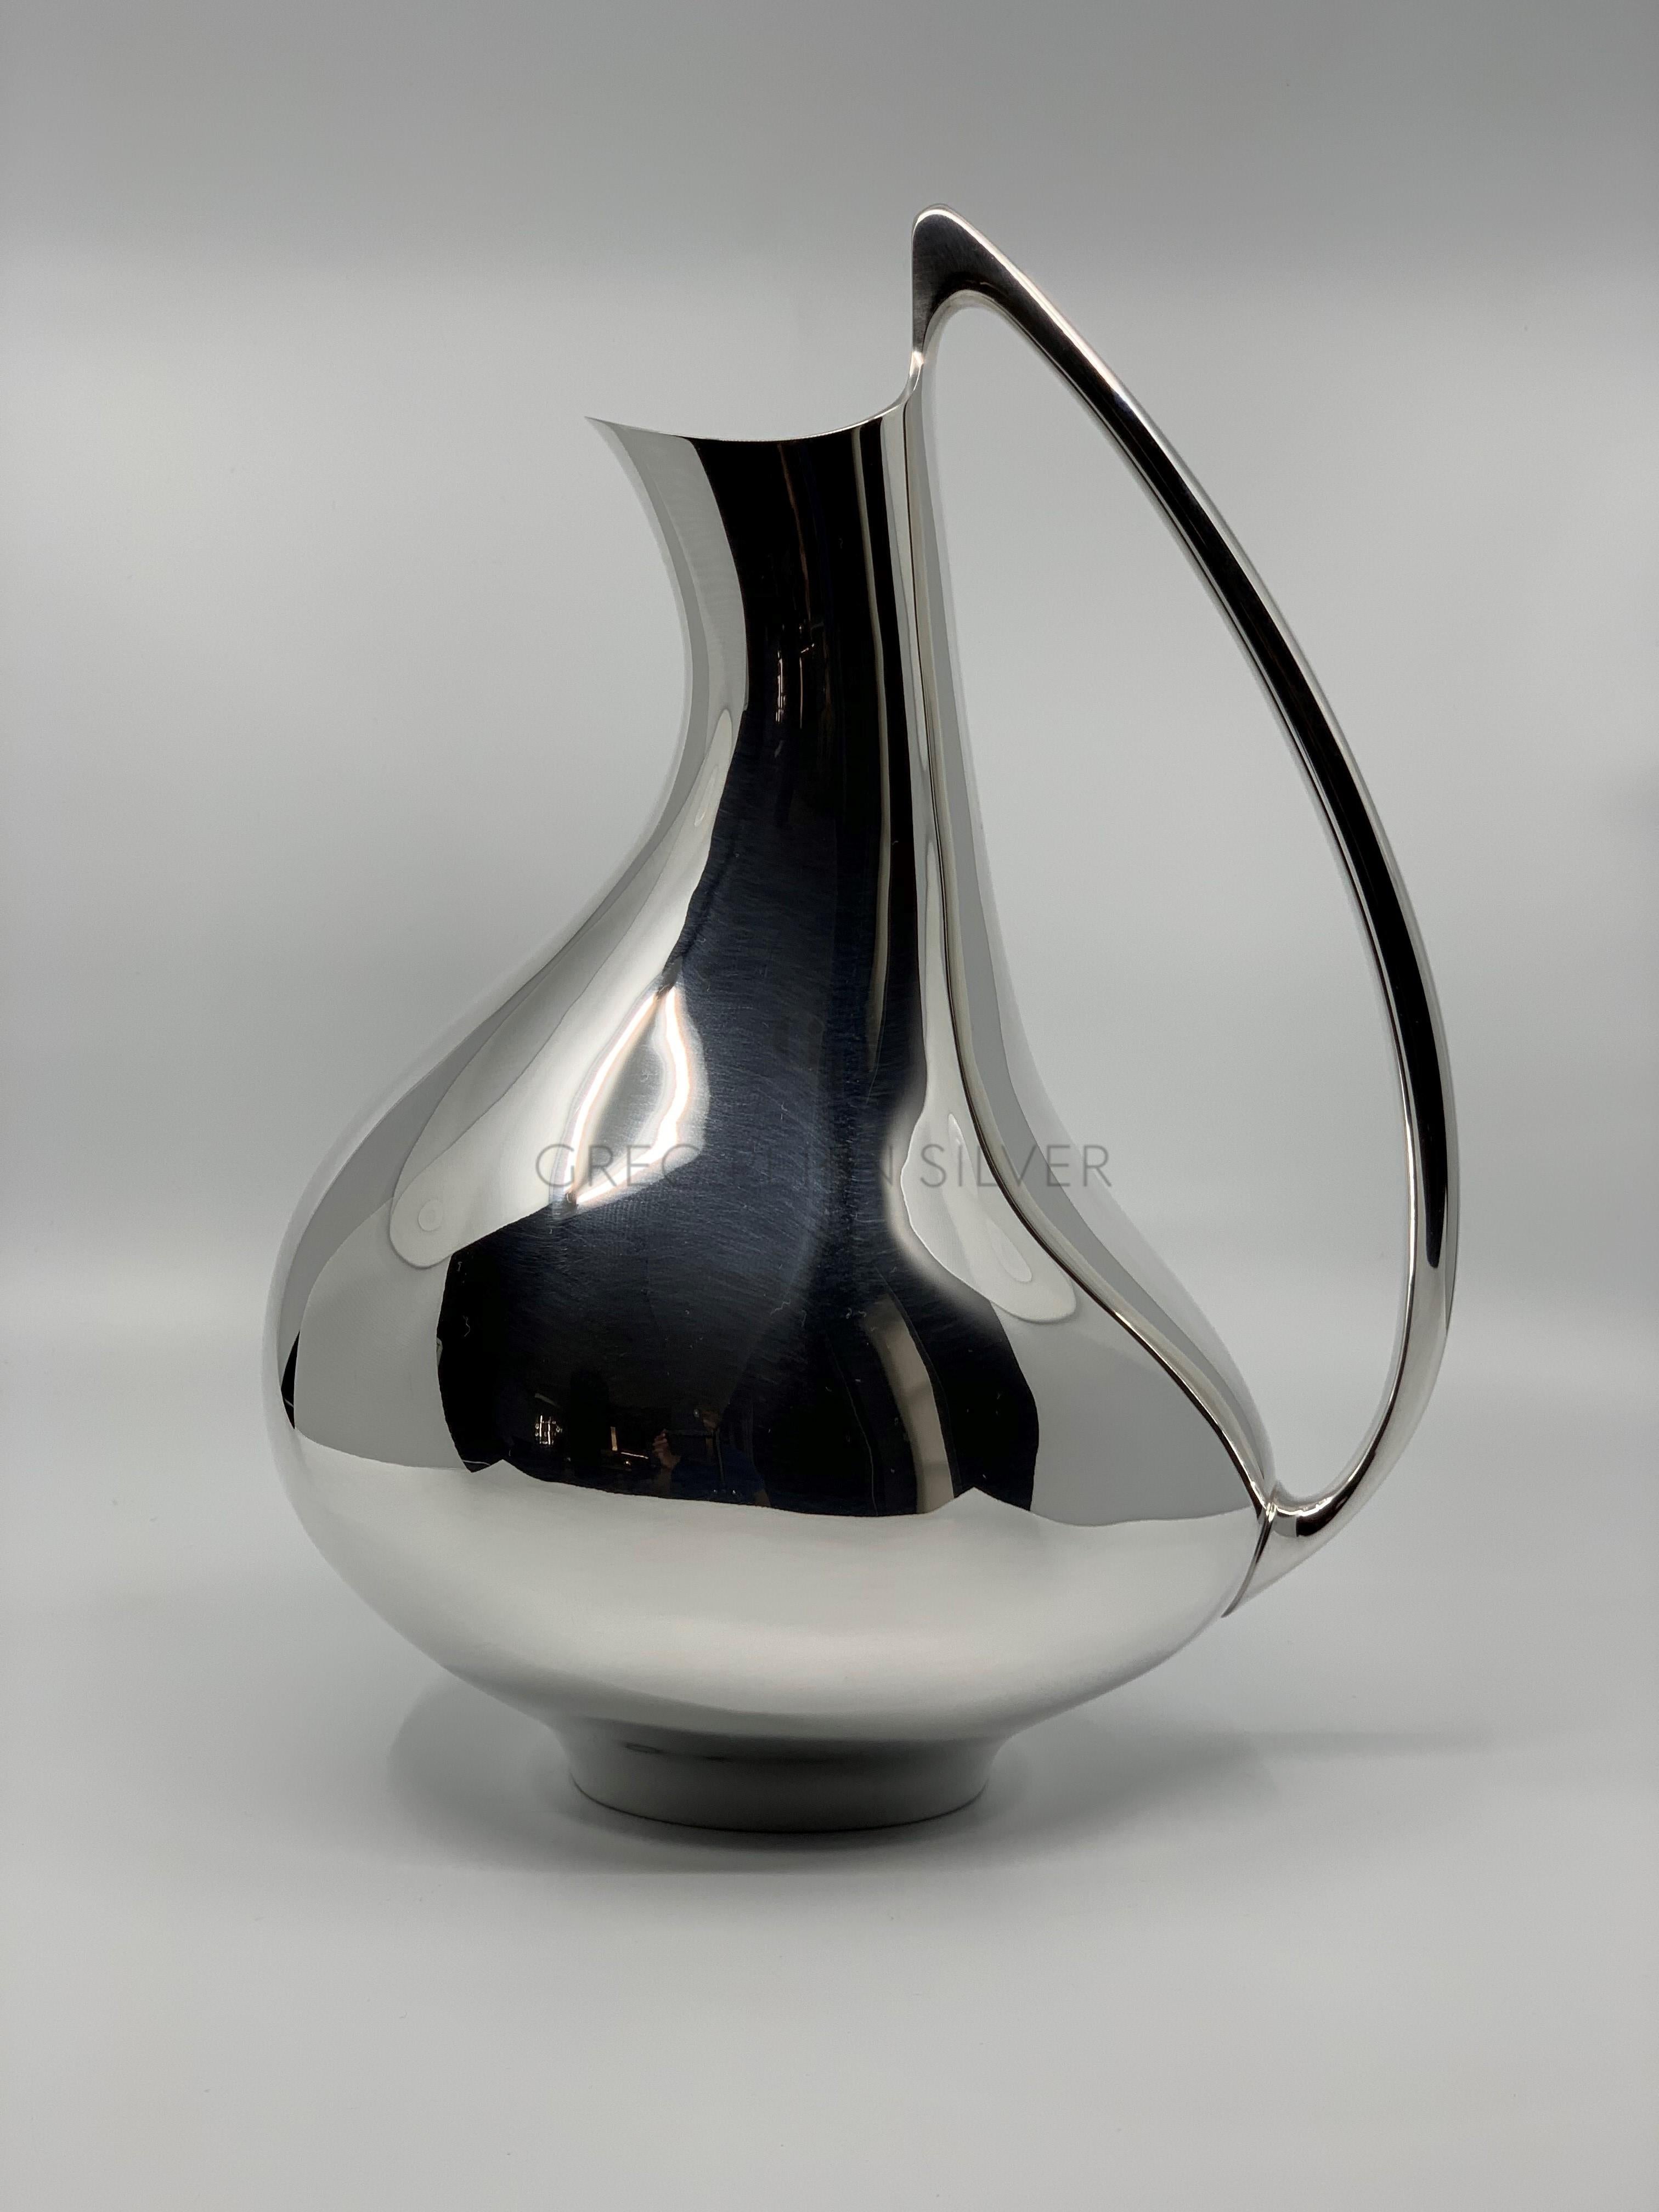 A modern sterling silver Georg Jensen pitcher, design #992 by Henning Koppel from 1952, known as the 